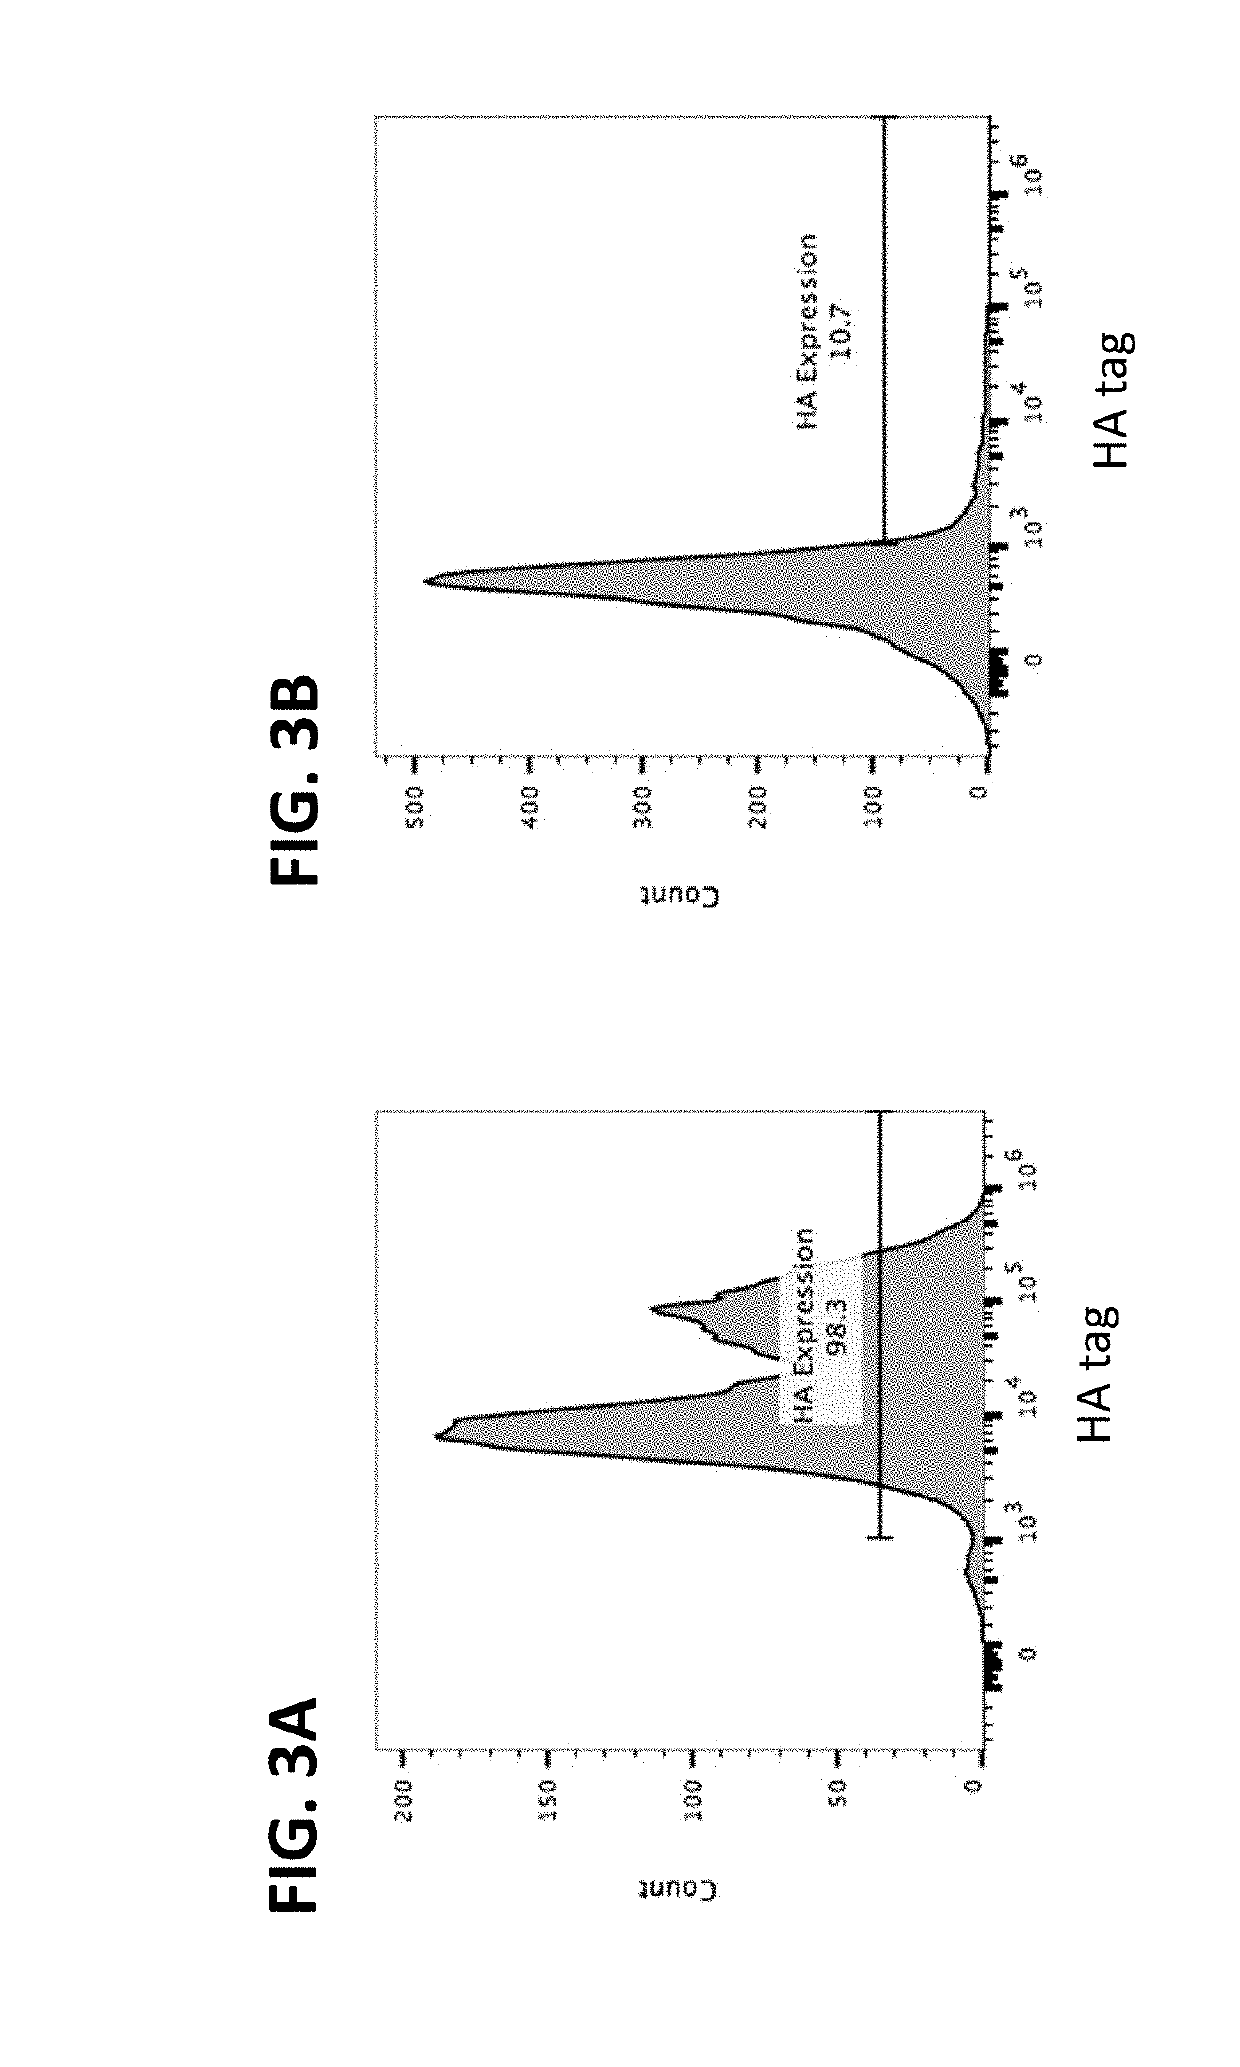 Compositions and methods related to therapeutic cell systems for tumor growth inhibition